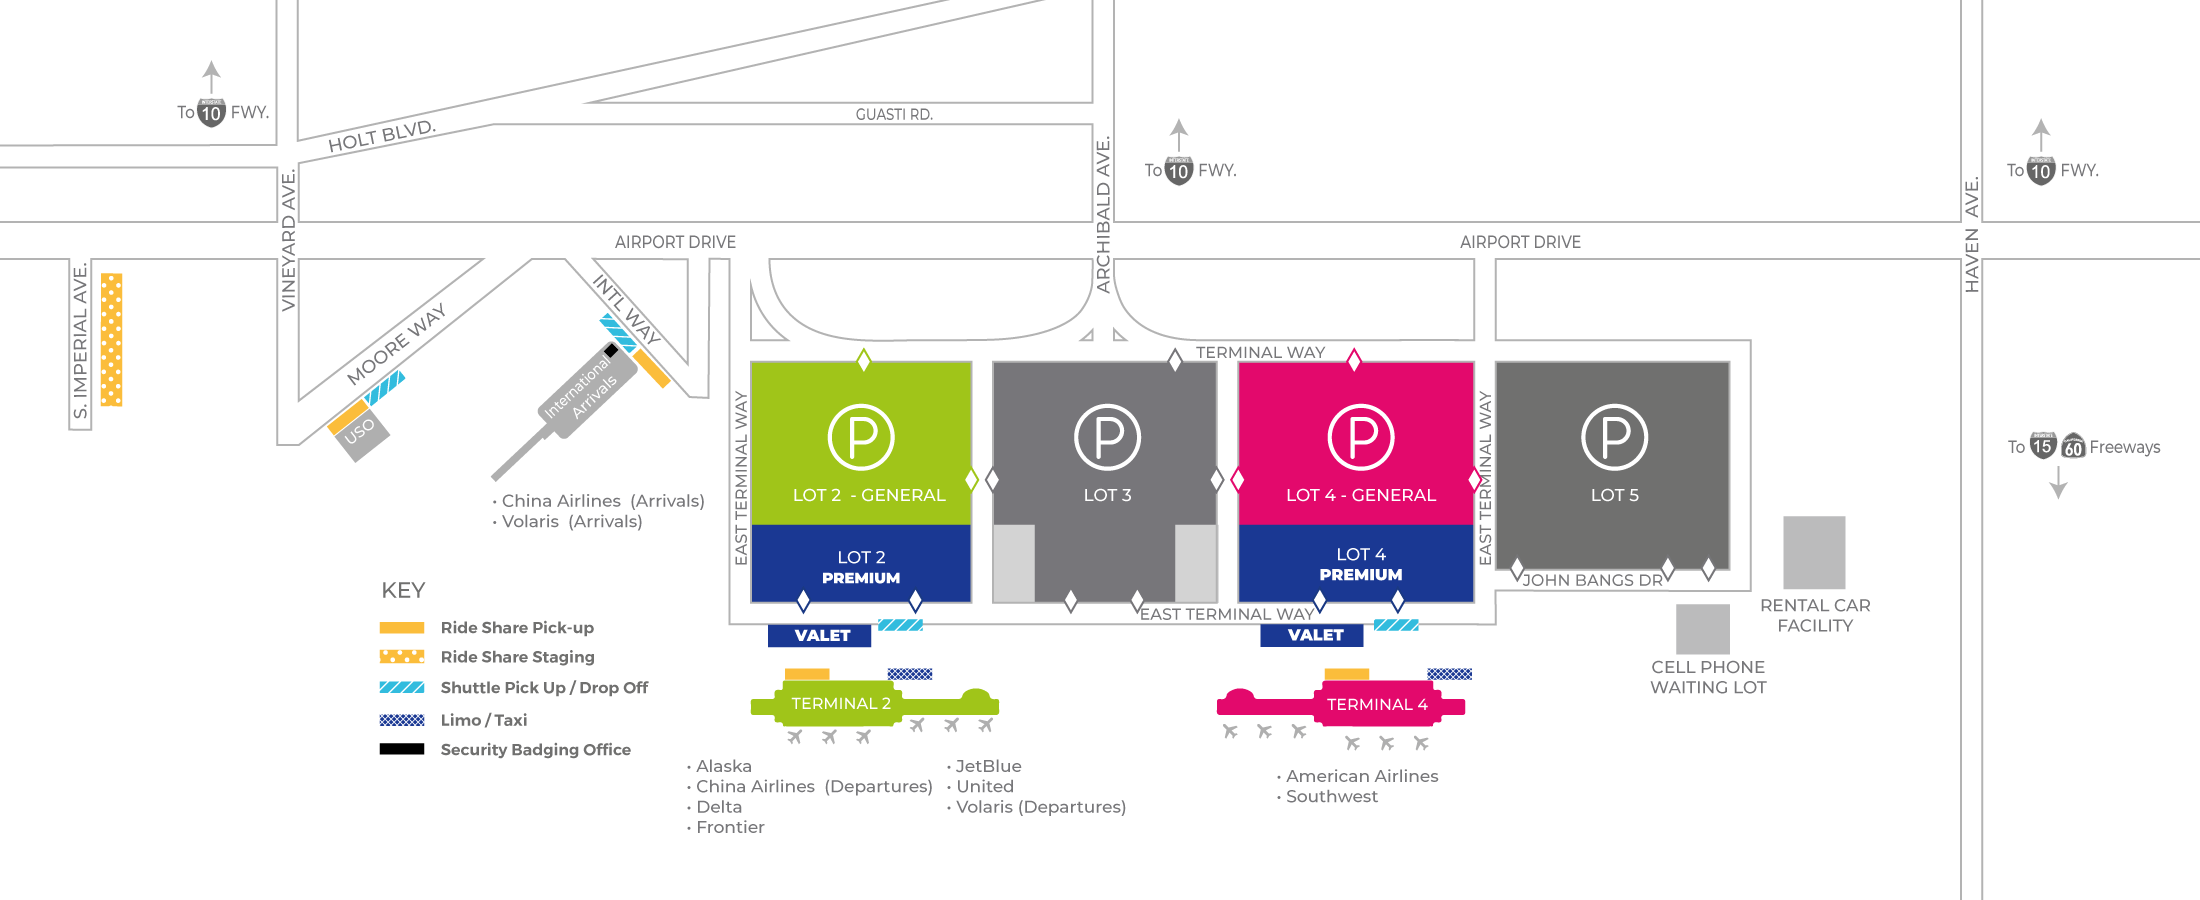 Ont Parking Map 11 19 20 